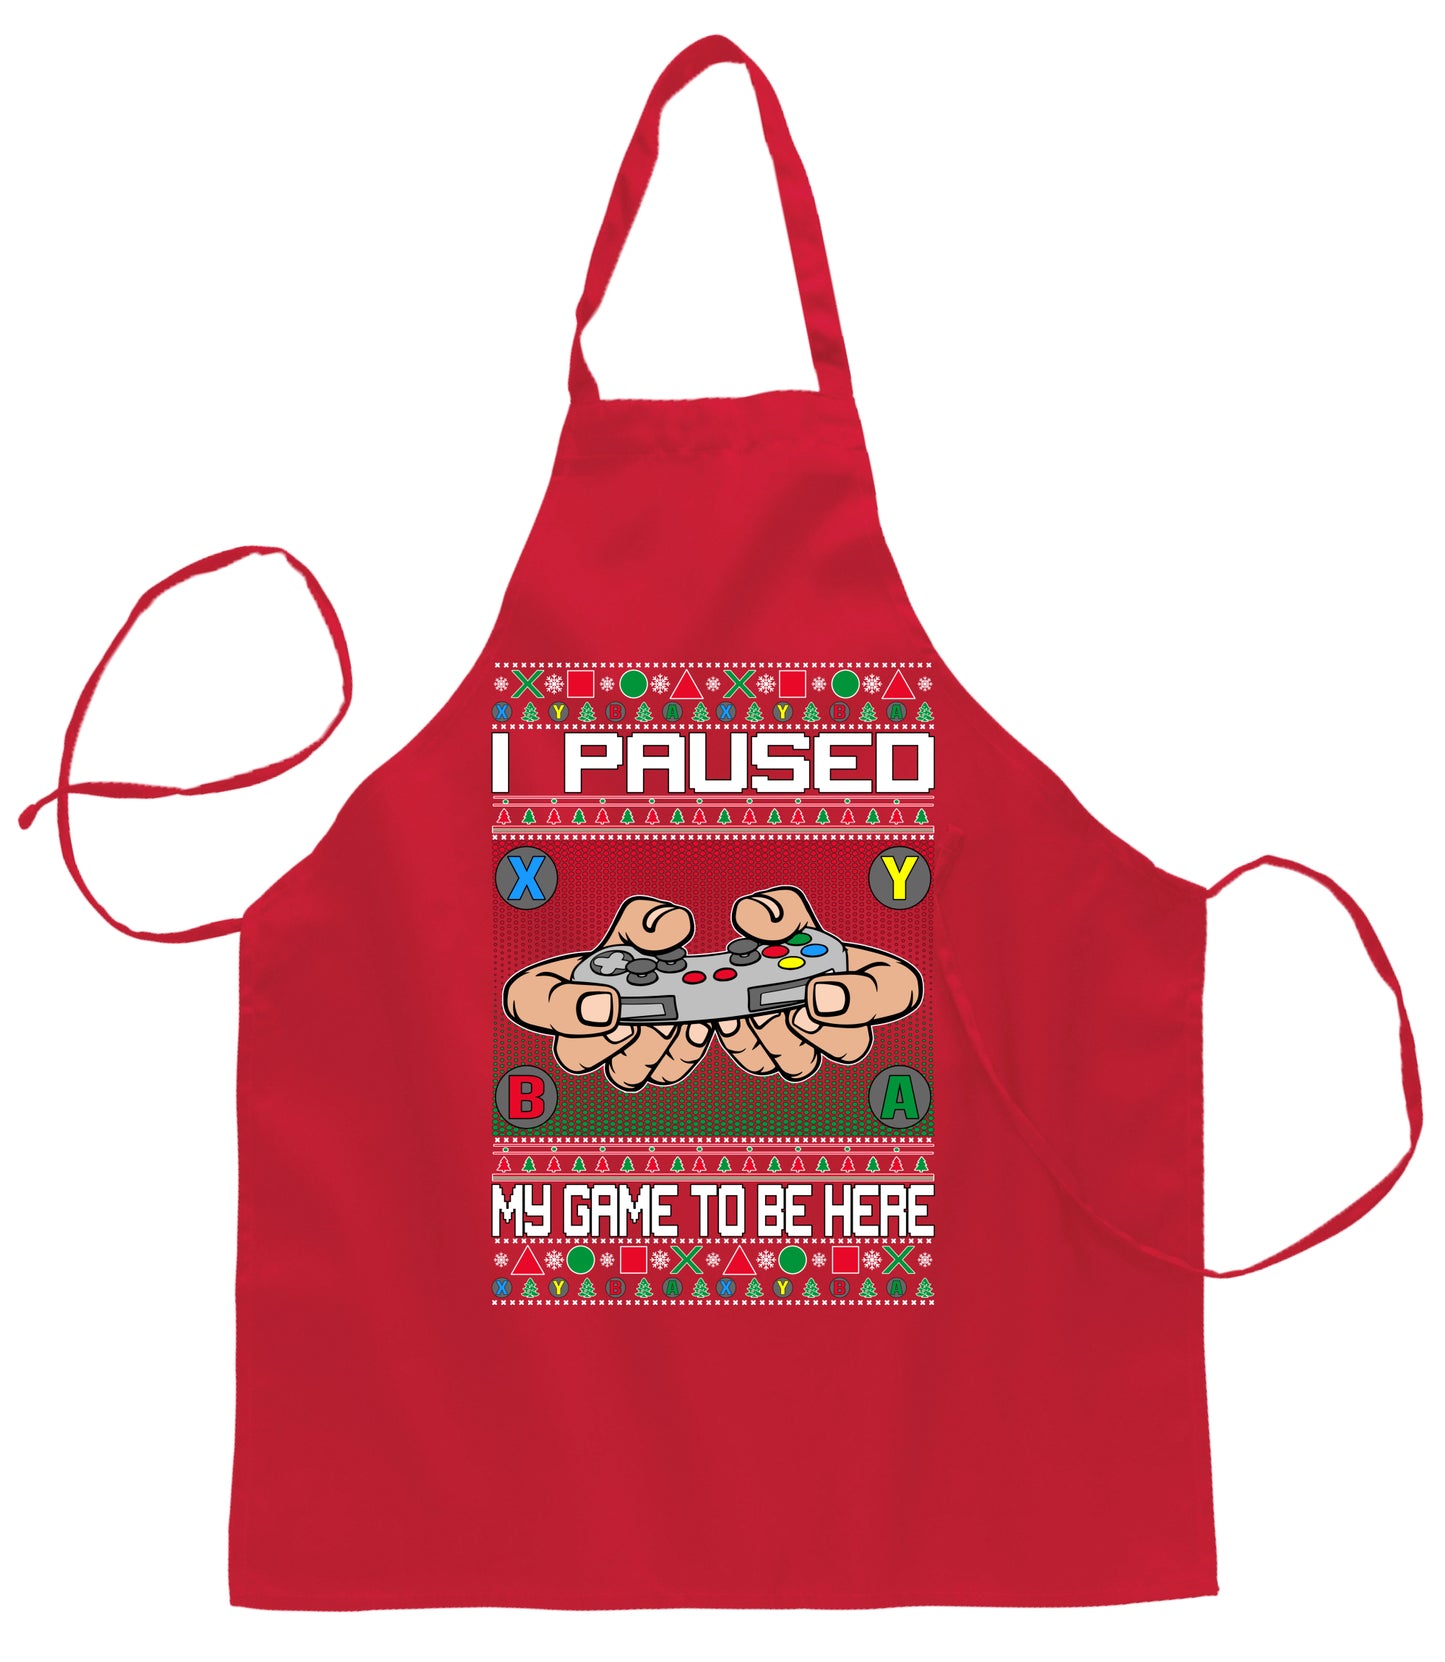 I Paused My Game to Be Here  Ugly Christmas Sweater Ugly Christmas Butcher Graphic Apron for Kitchen BBQ Grilling Cooking